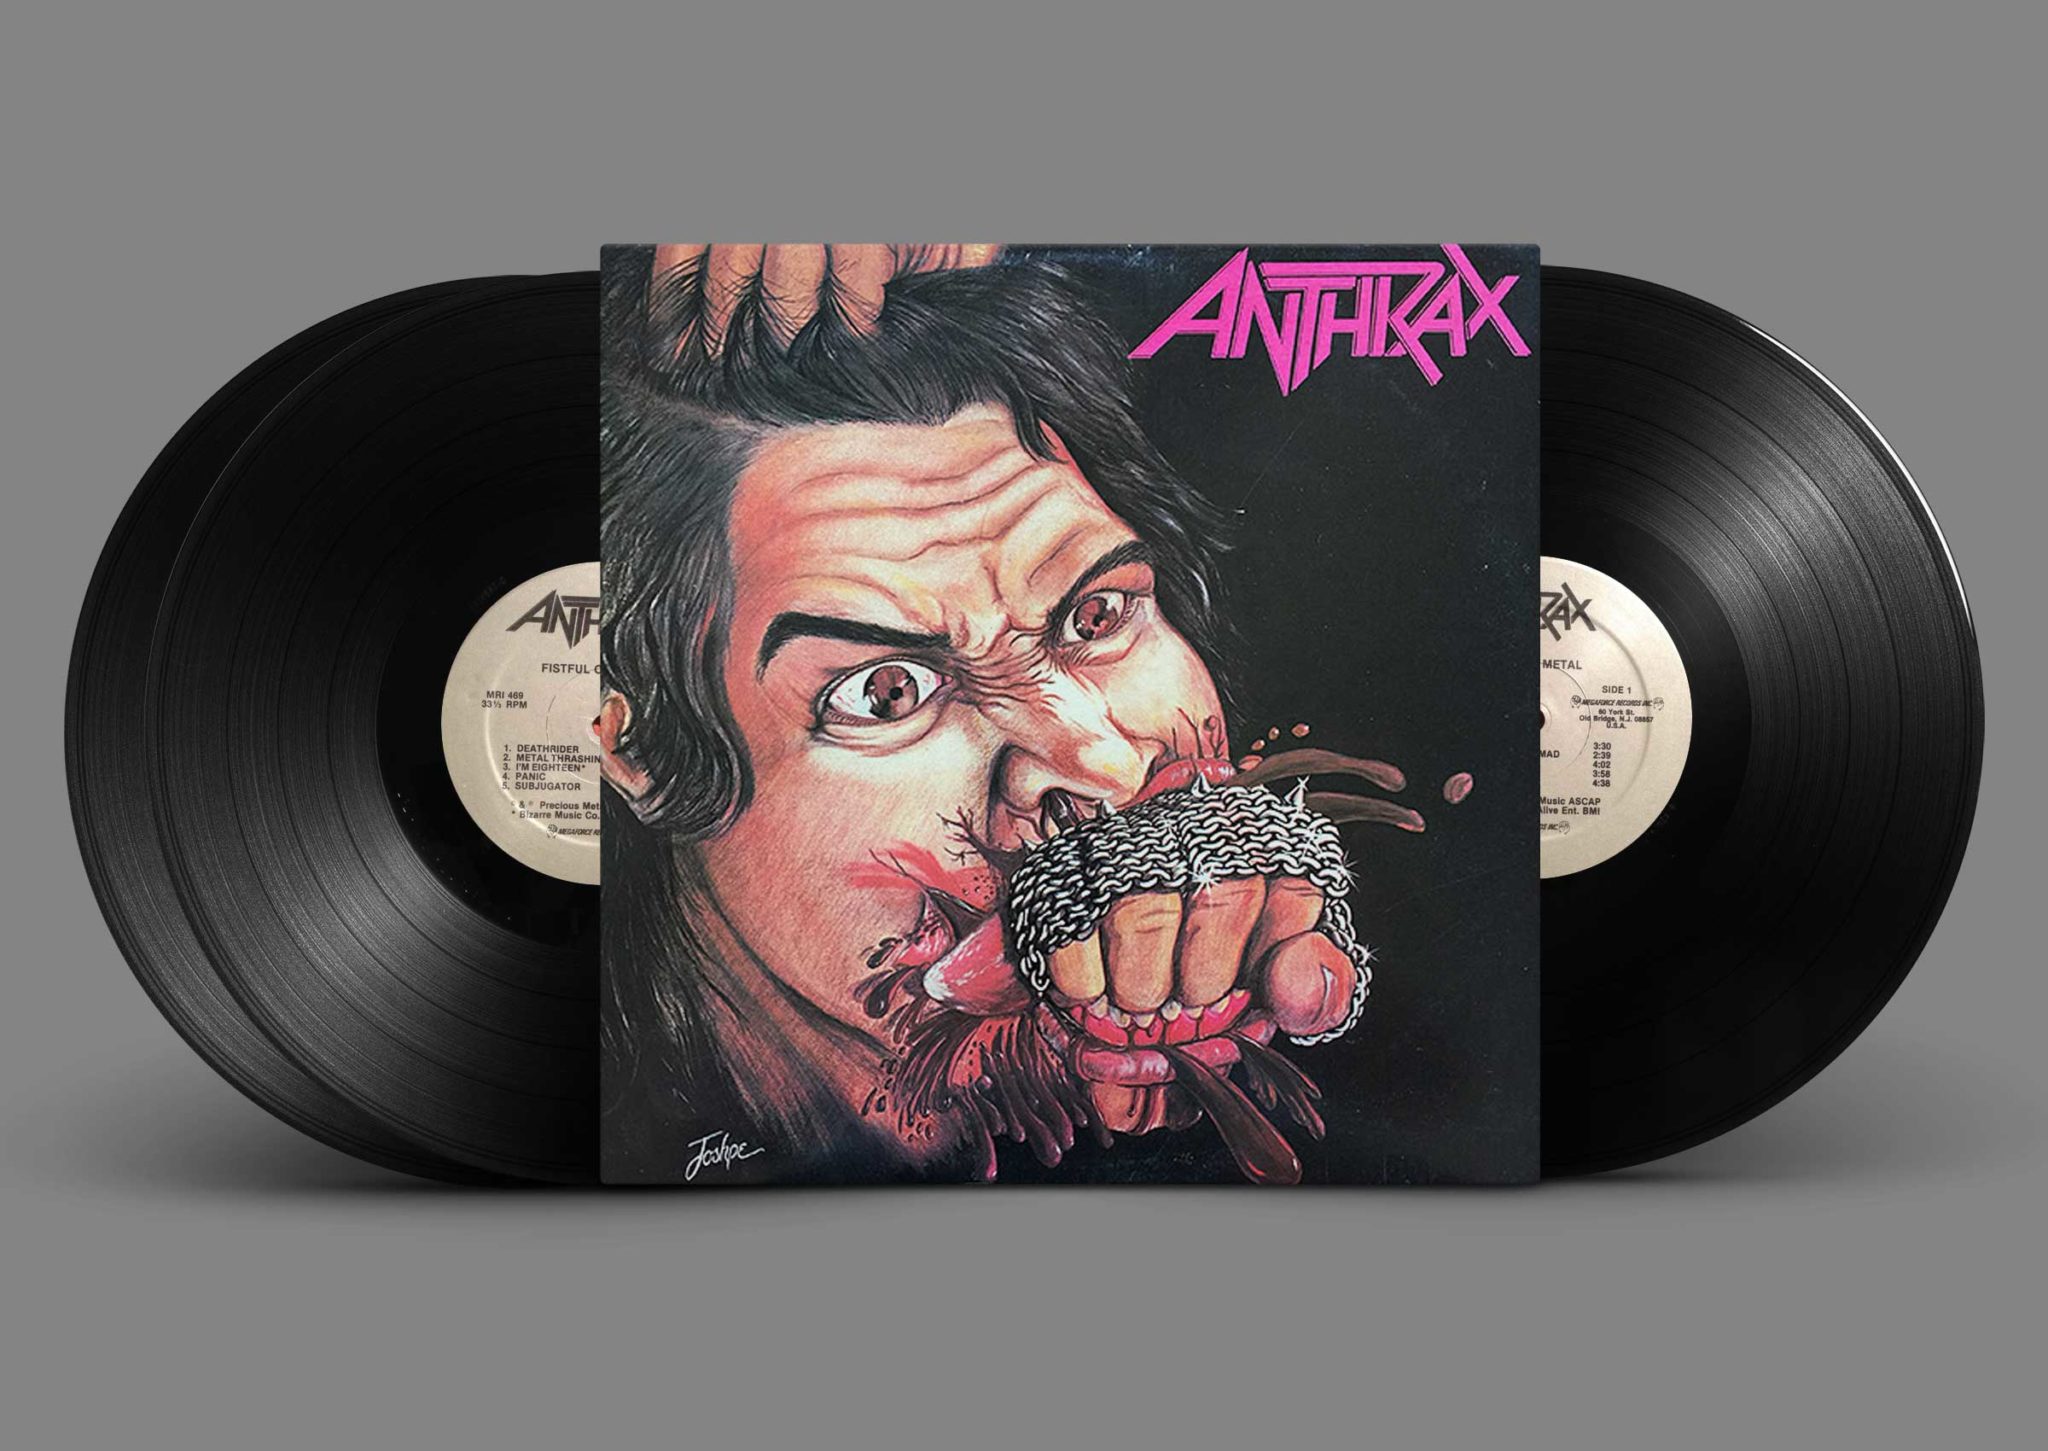 ANTHRAX Fistful Of Metal - Armed and Dangerous | Underground Records